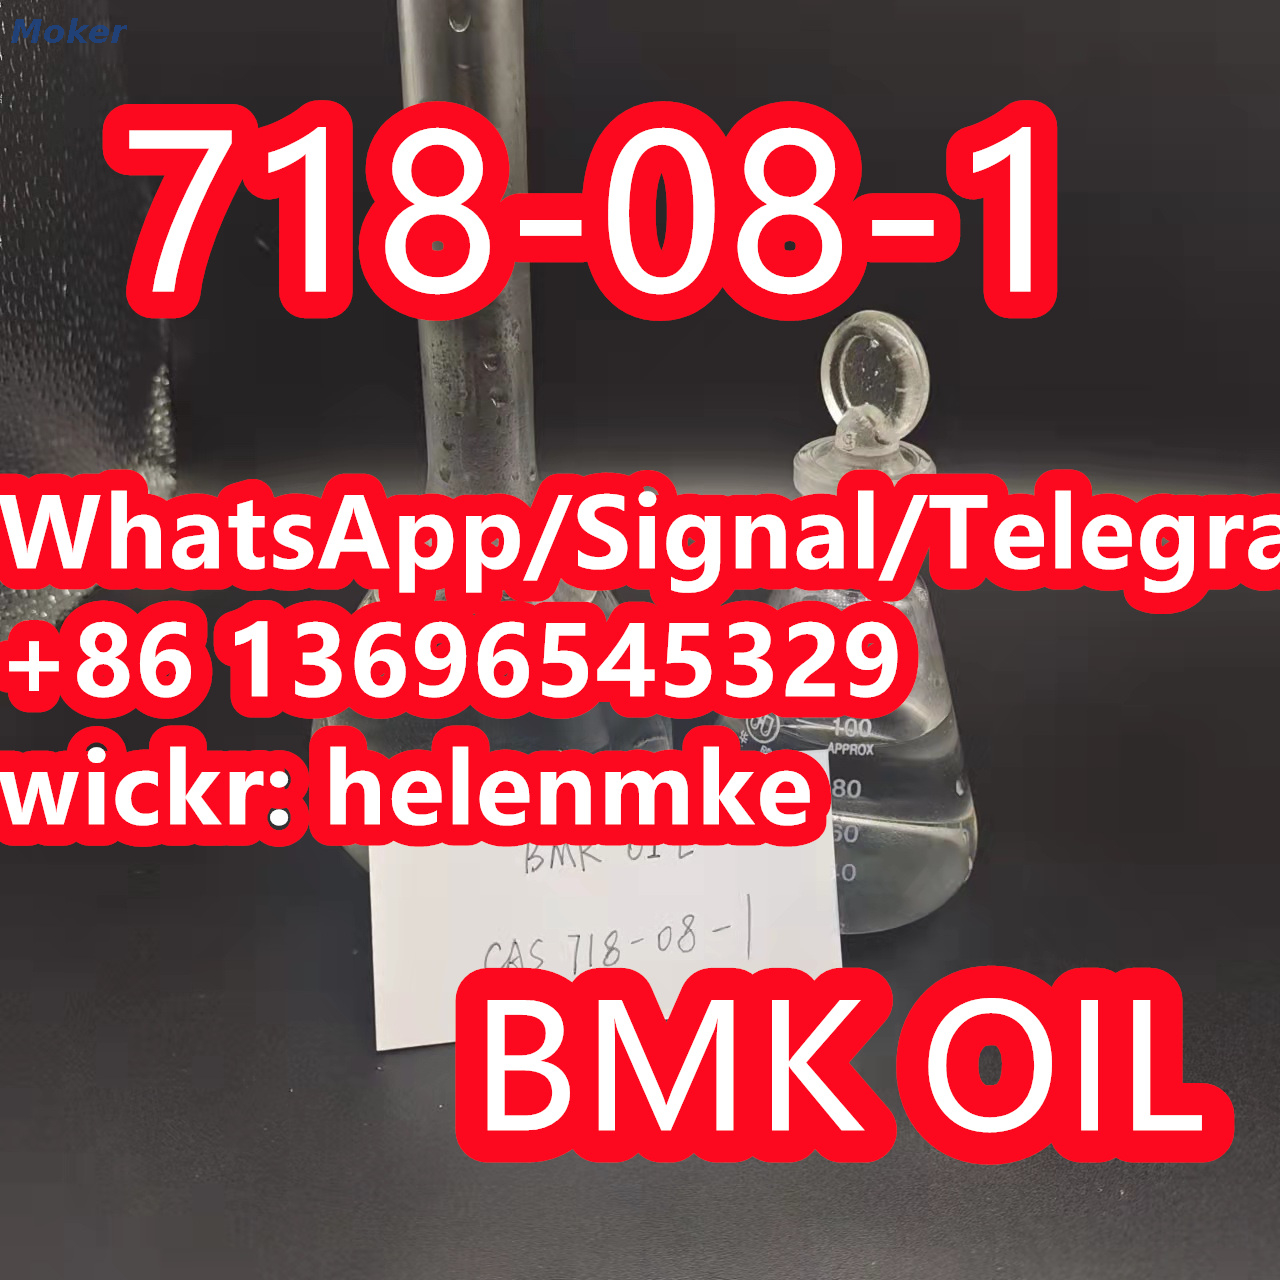 High Quality Bmk oil CAS 718-08-1 with Low Price Safe Delivery